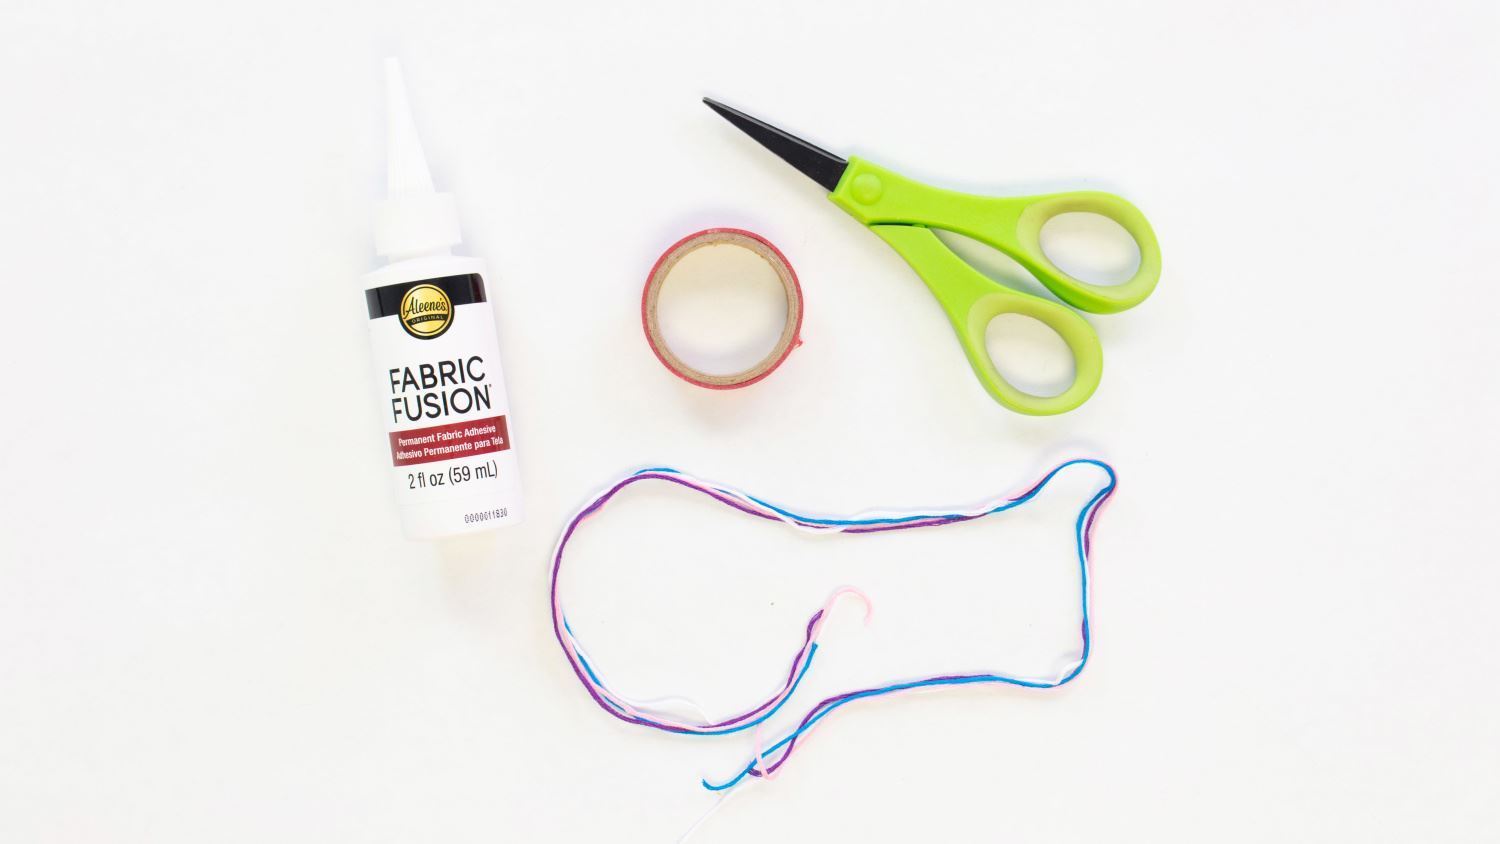 Cut embroidery floss